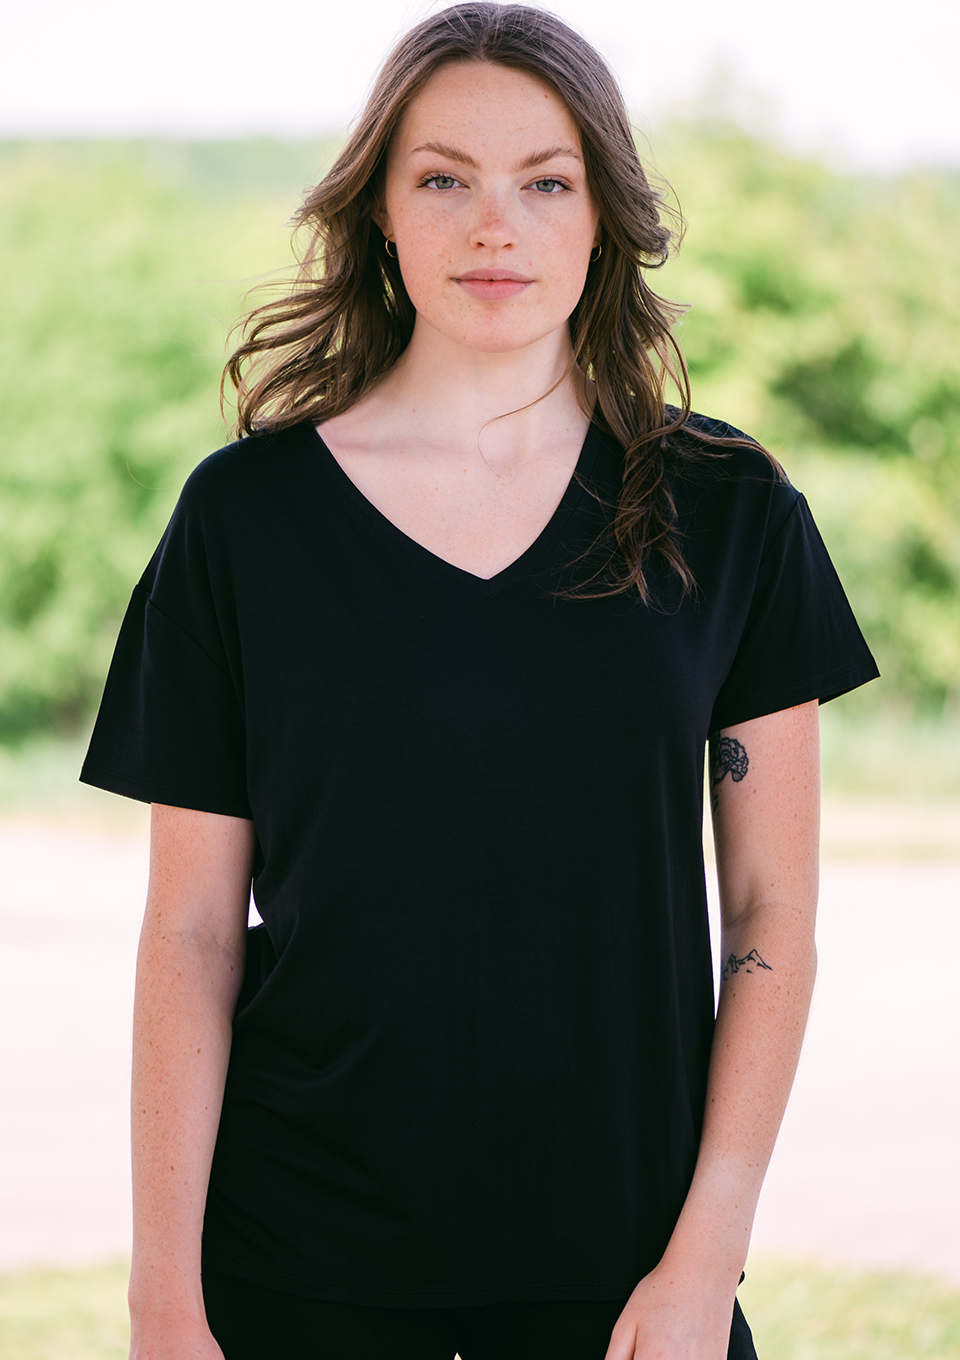 Picture this, cozy Sunday, cup of coffee and your favorite tee. This is that tee! Relaxed fit, flattering V-neckline, soft bamboo, casual yet put together. Fabrication: 95% Viscose from Bamboo 5% Spandex Terrera $50.00 Black